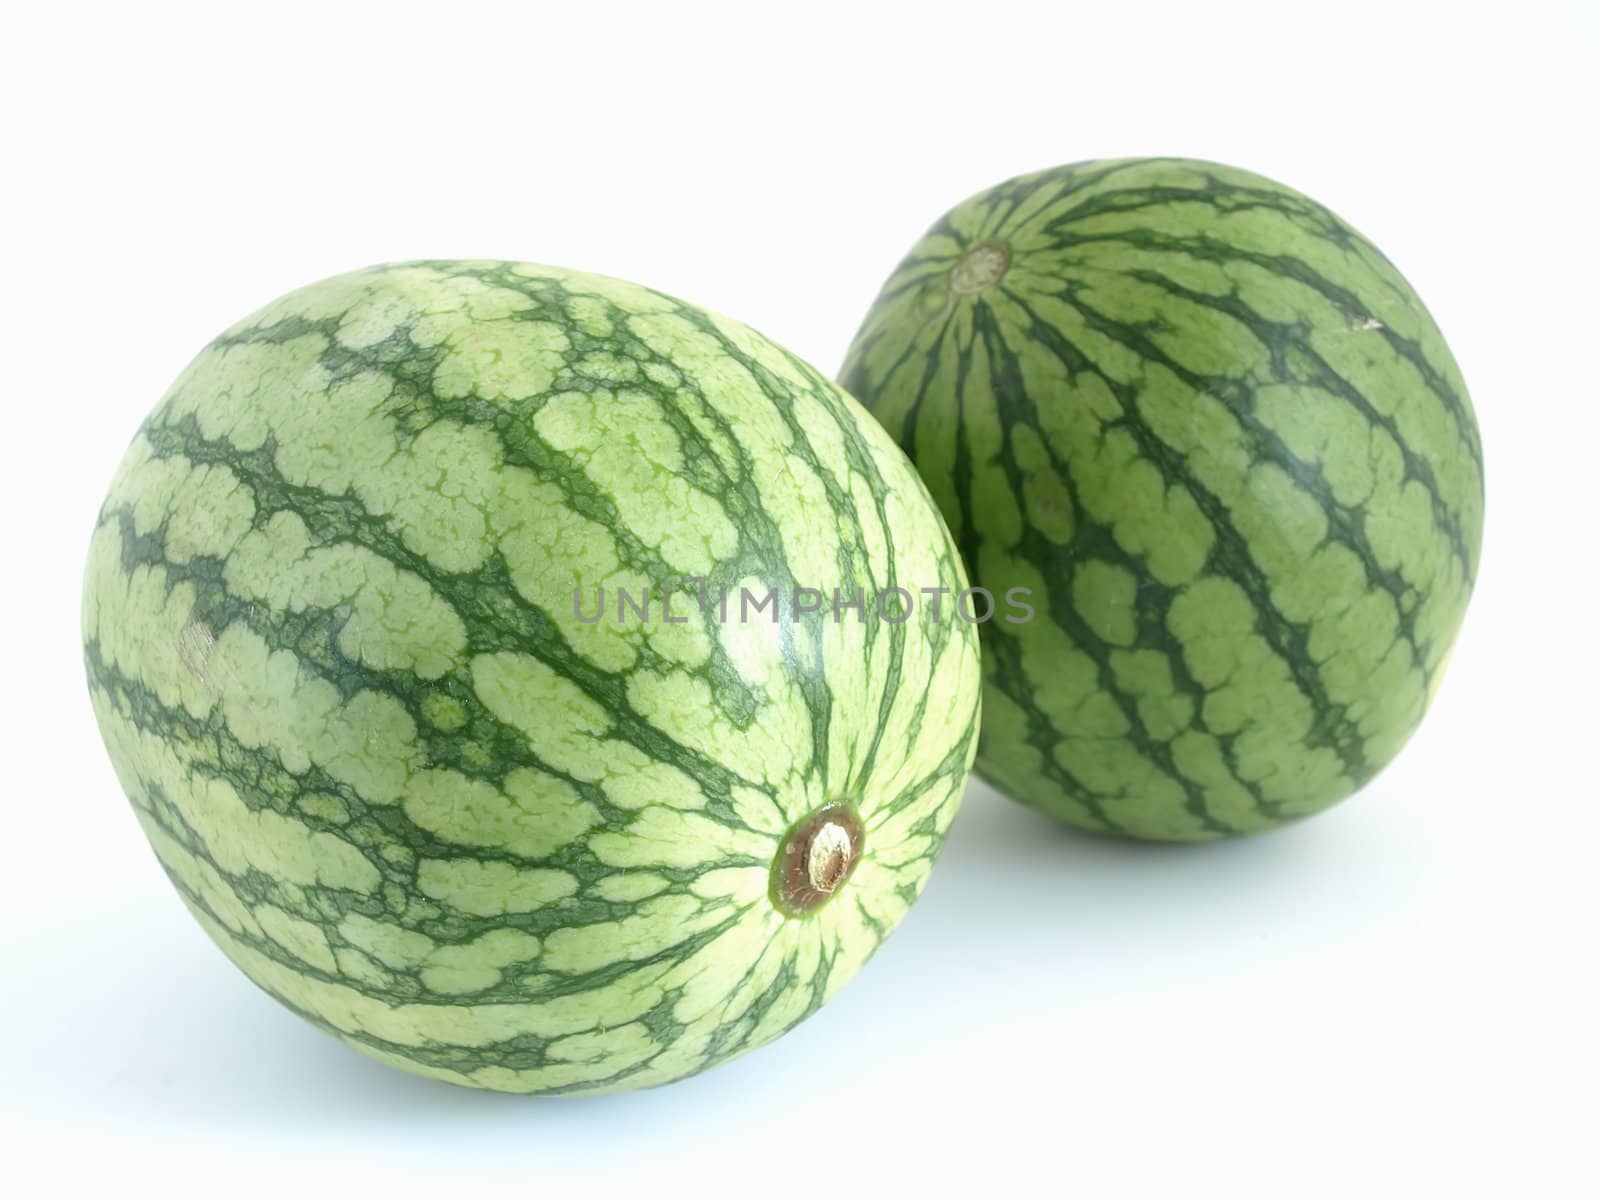 Two isolated green watermelons studio isolated against a white background.